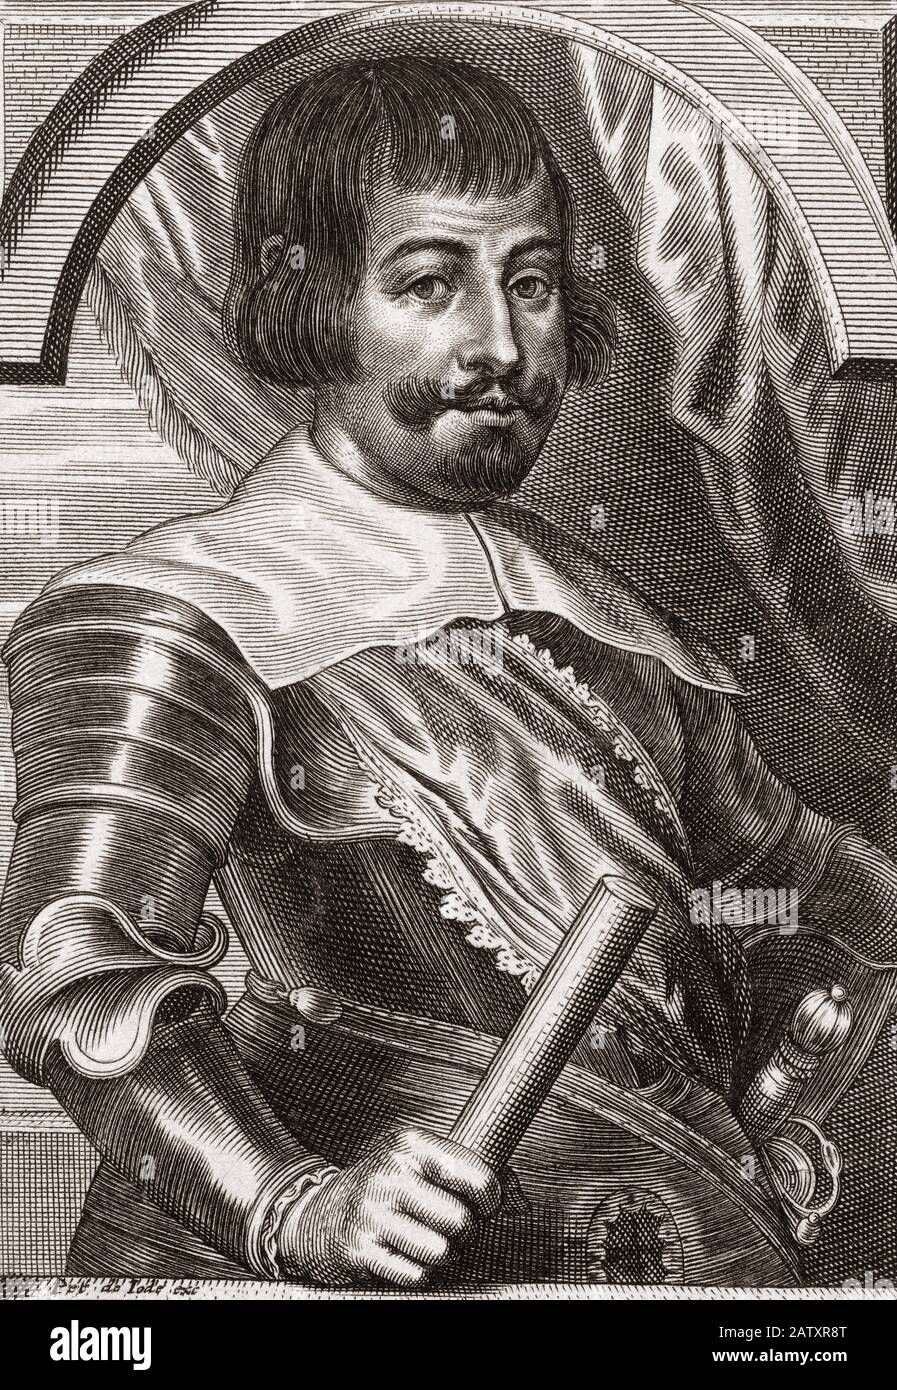 Francisco de Melo, 1597 - 1651.  Portuguese born nobleman and general who became interim governor of the Southern Netherlands.  He was a commander of the Spanish army which was defeated by the French at the battle of Rocroi. Stock Photo